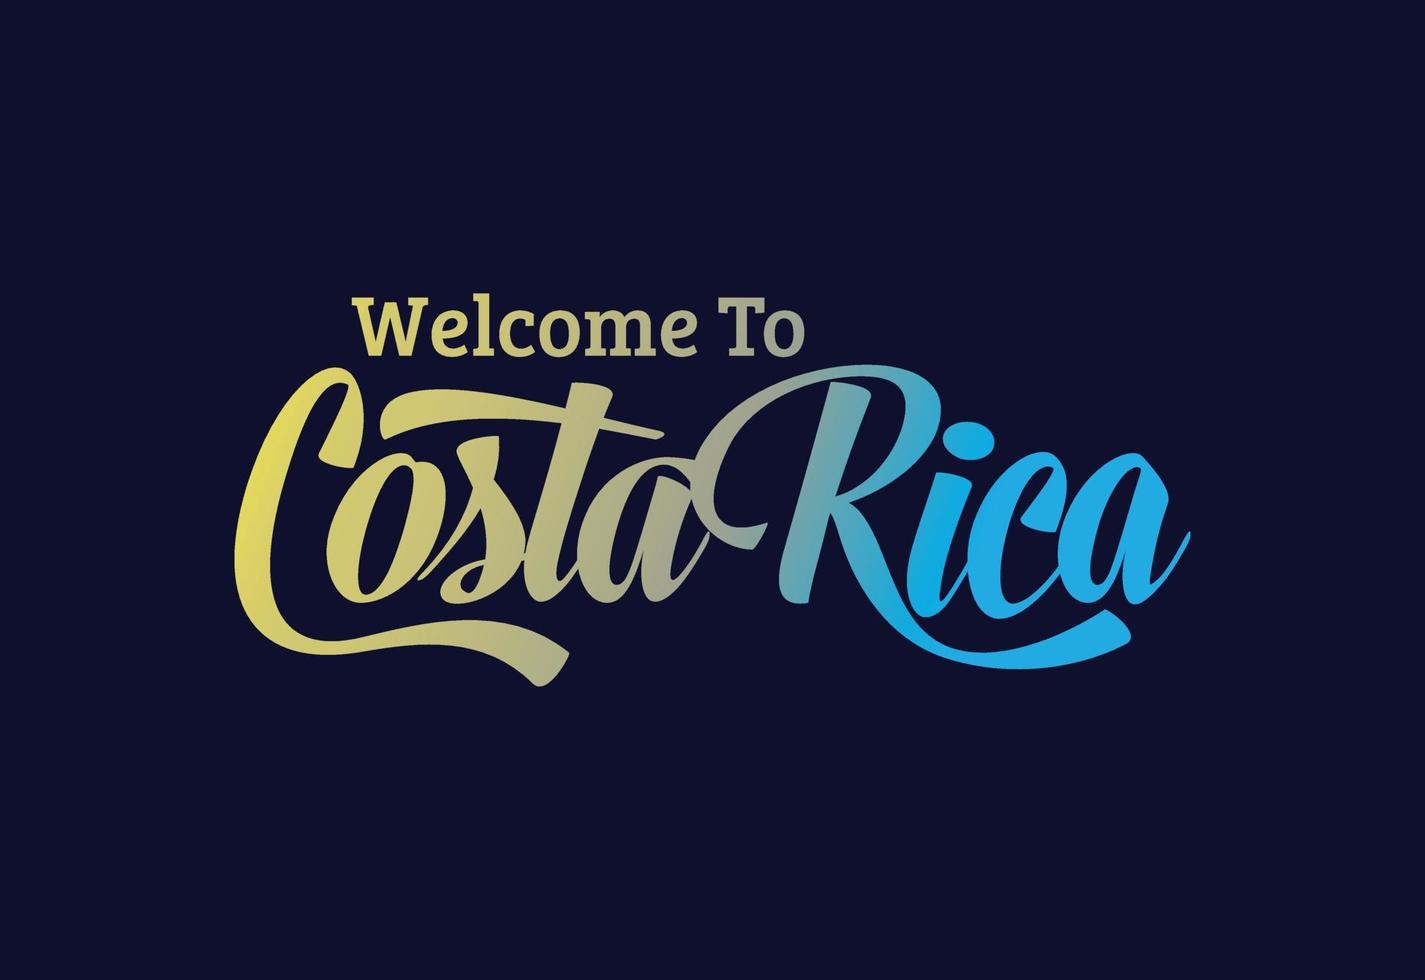 Welcome To Costa Rica. Word Text Creative Font Design Illustration. Welcome sign vector